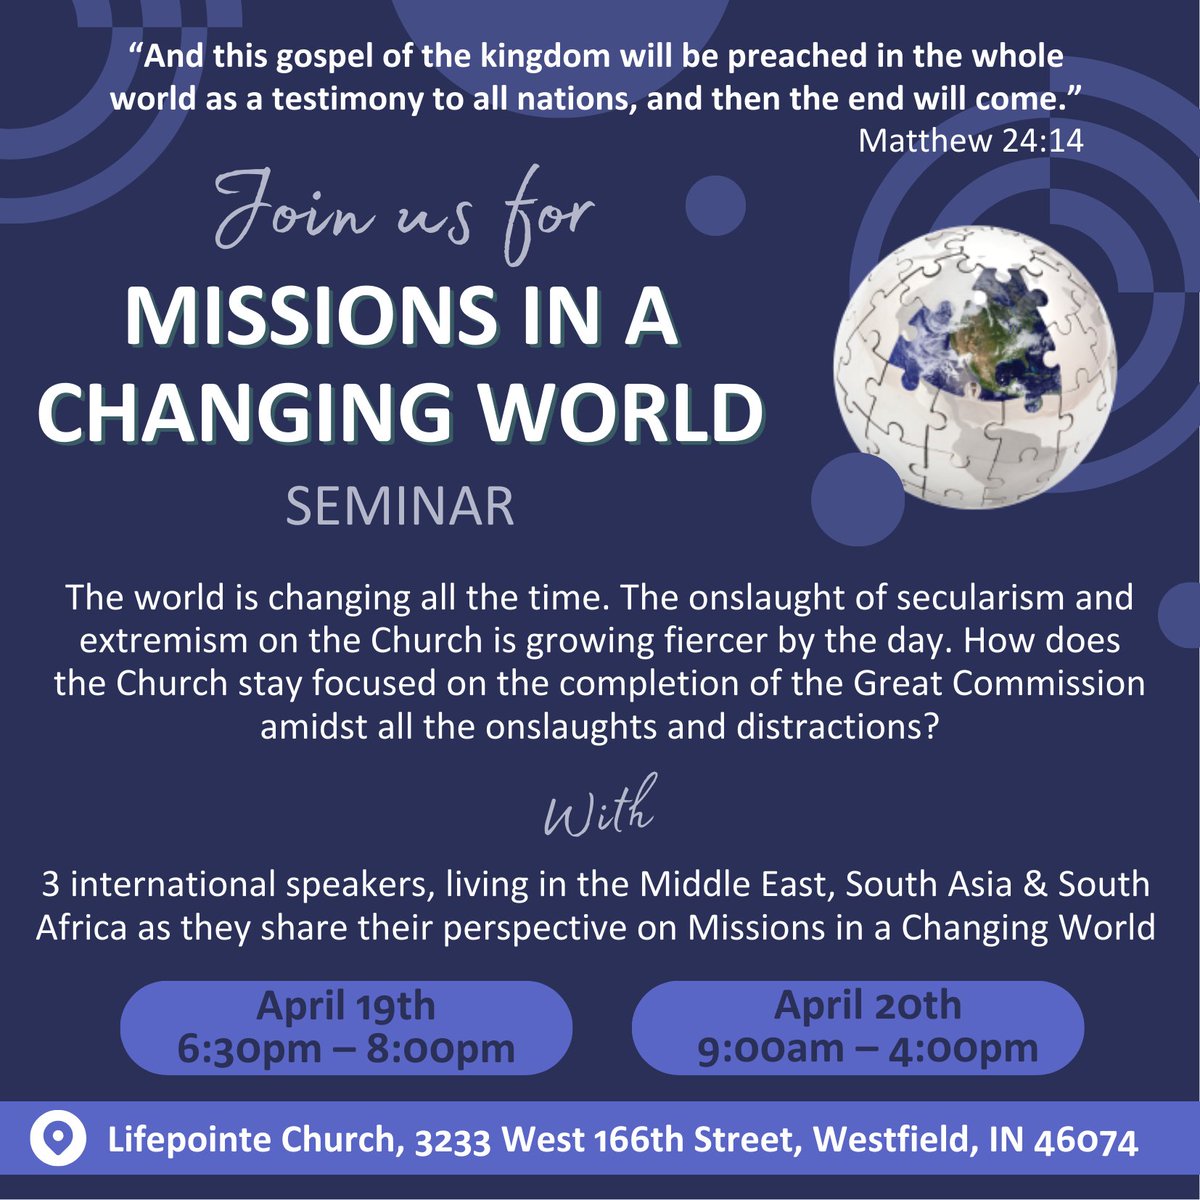 Don't forget about our upcoming seminar in Indianapolis at @lifepointchurchwestfield this weekend, on Saturday (April 19-20). #INcontext #INcontextInternational #Christianperspective #missions #SouthAfrica #SouthAsia #MiddleEast #Indianapolis #Seminar #freeseminar #christianity